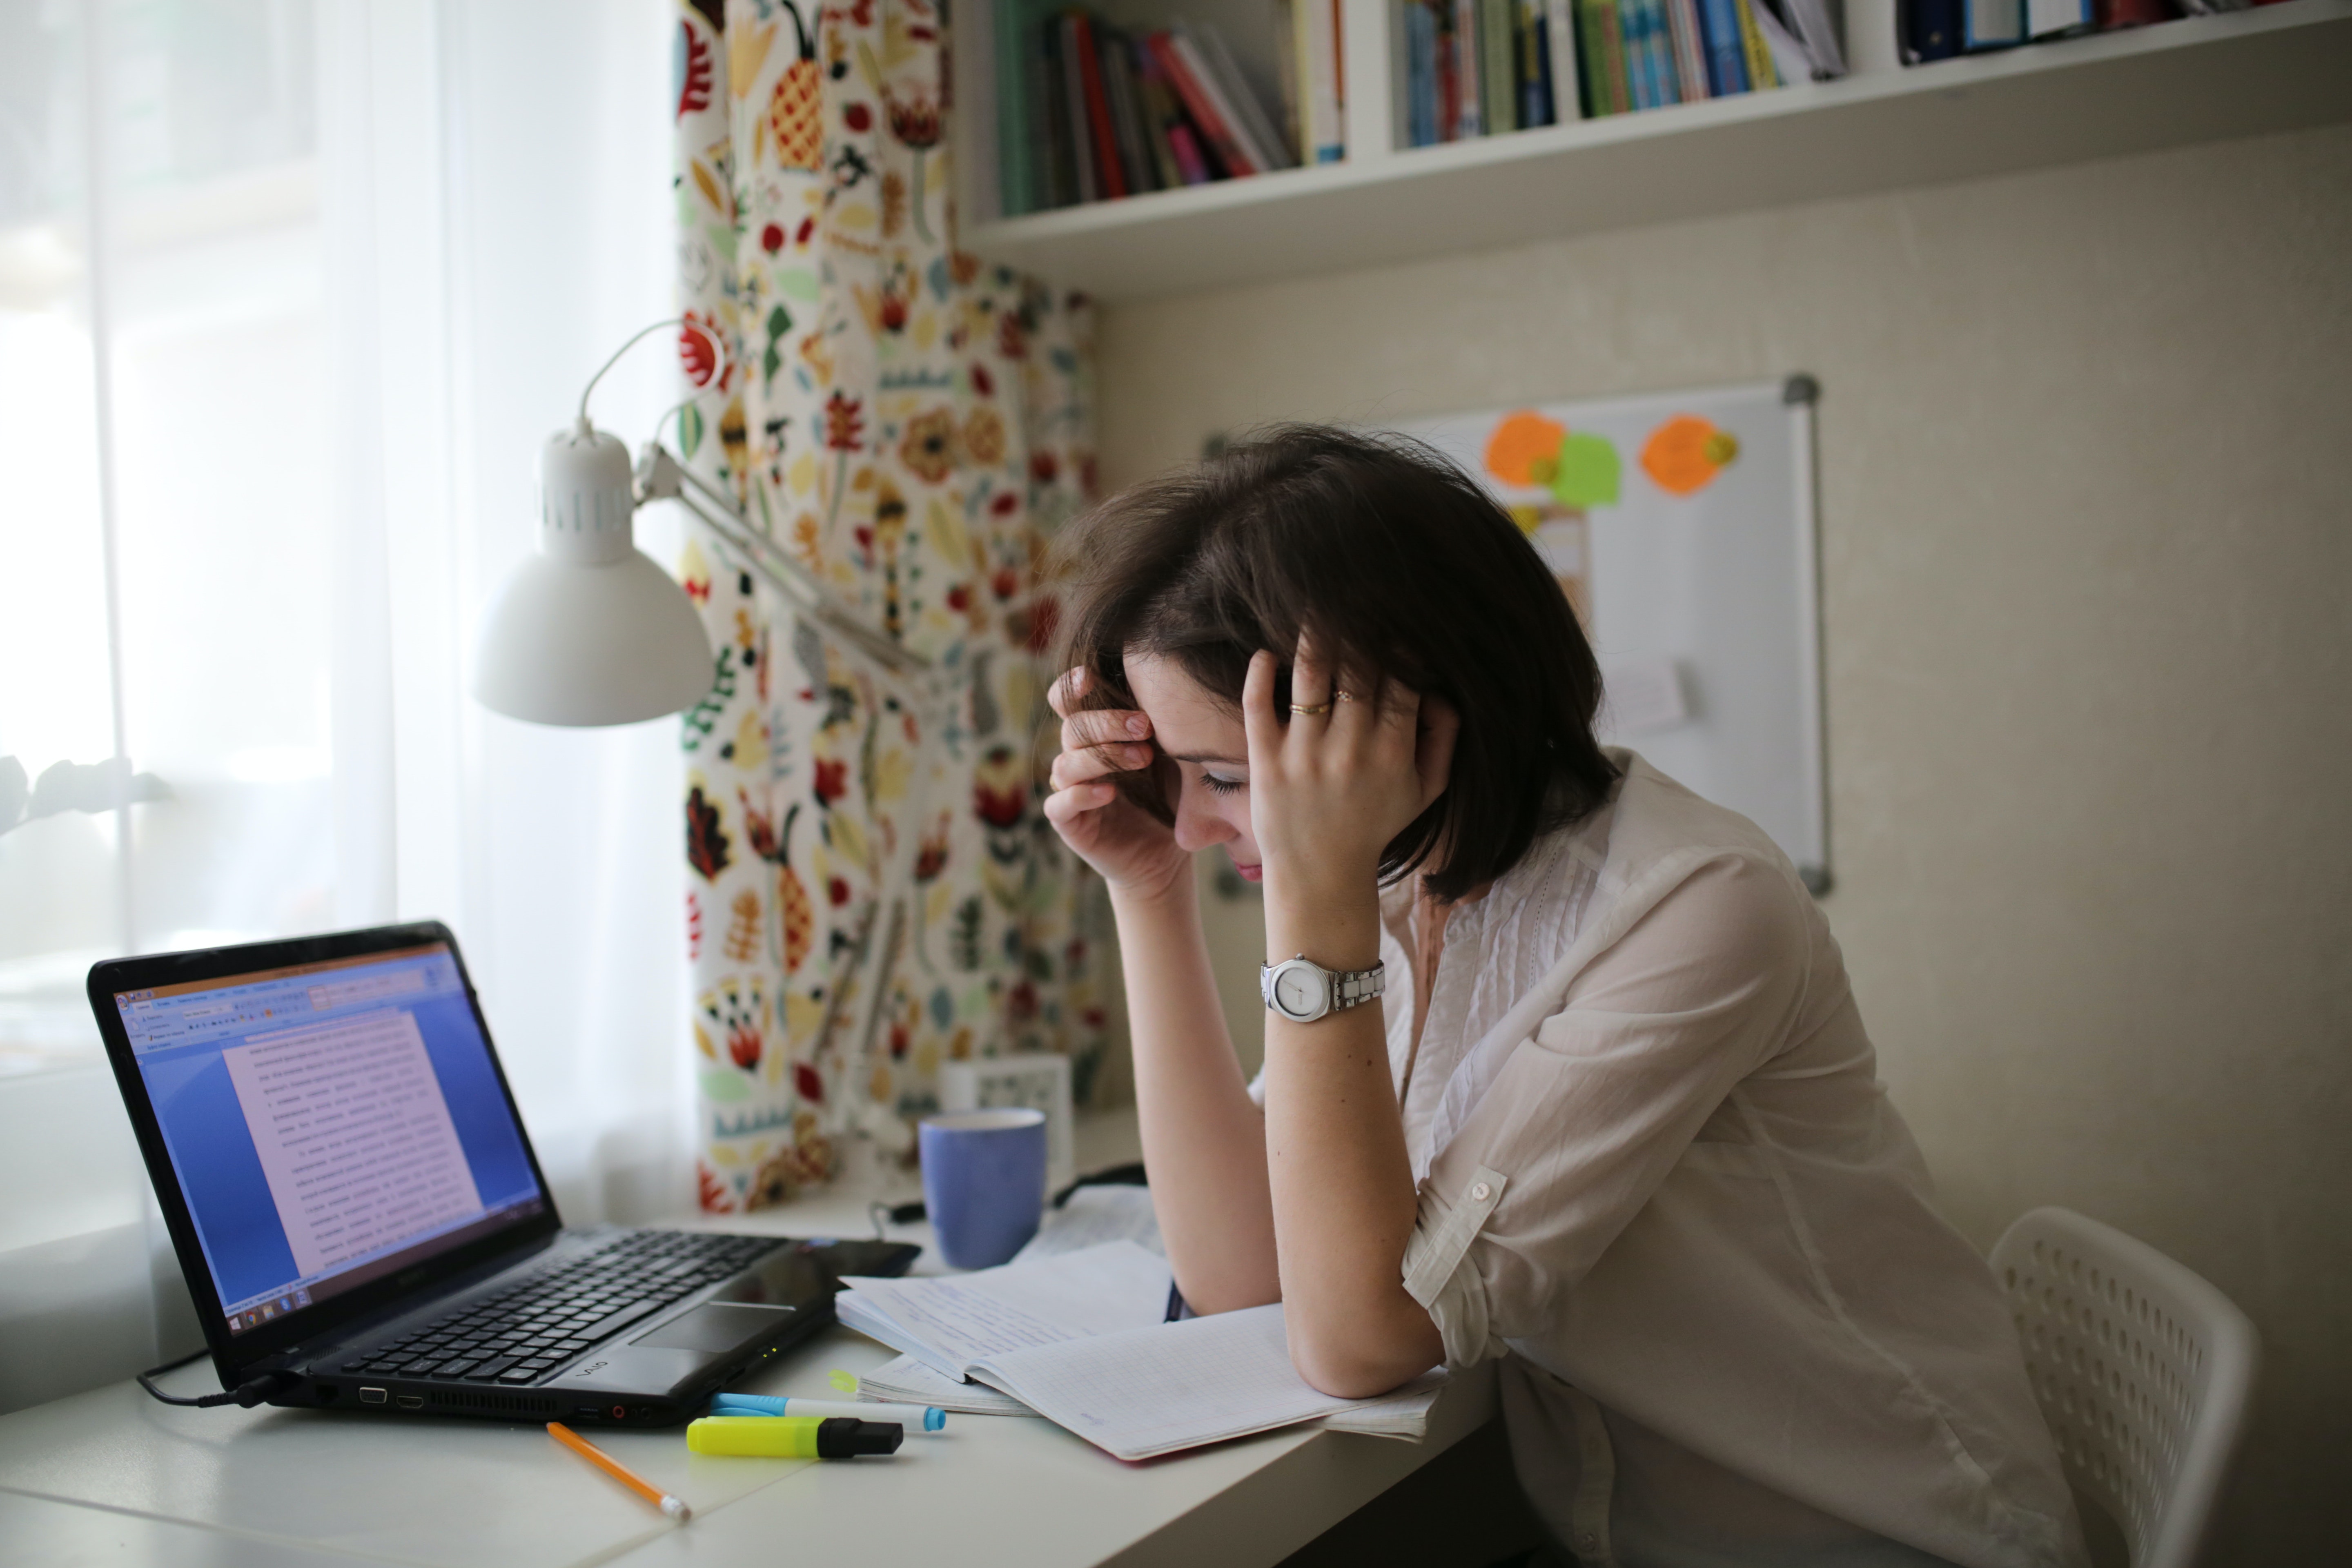 tired woman with laptop open in front of her rests head on hands at desk